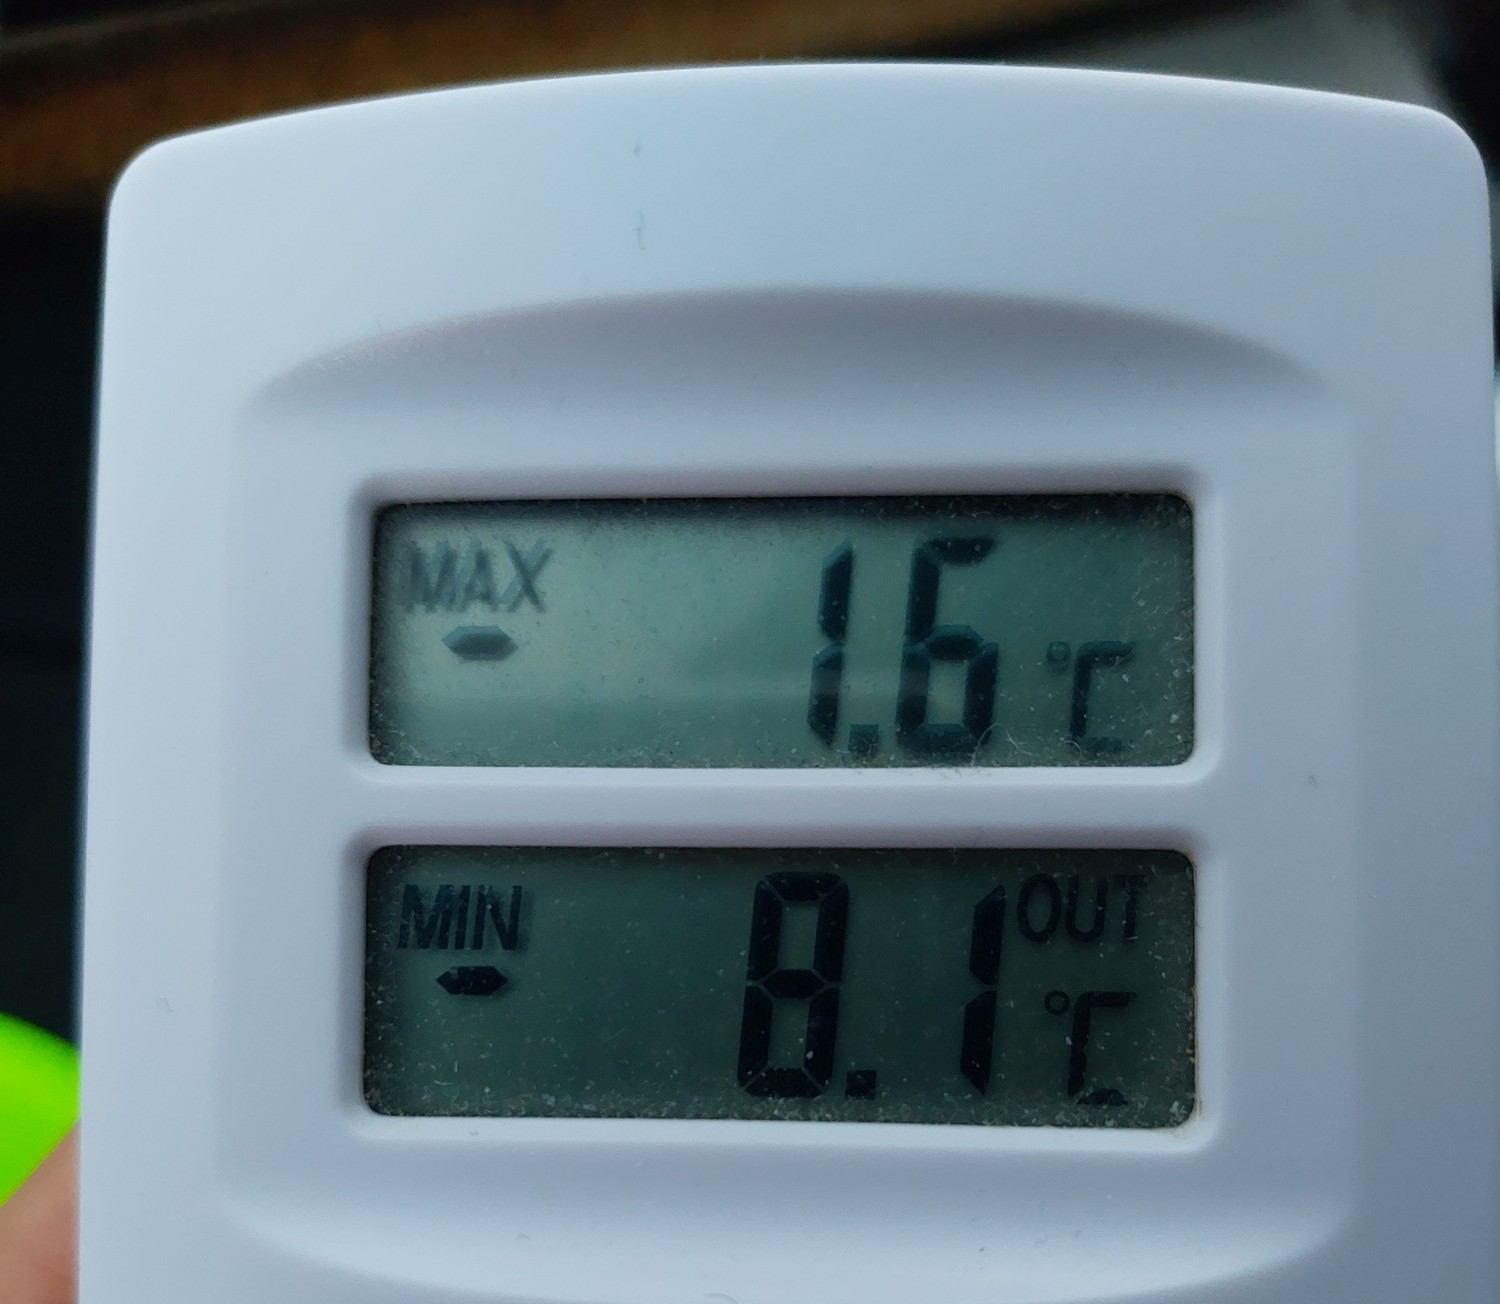 Thermometer: -8 °C